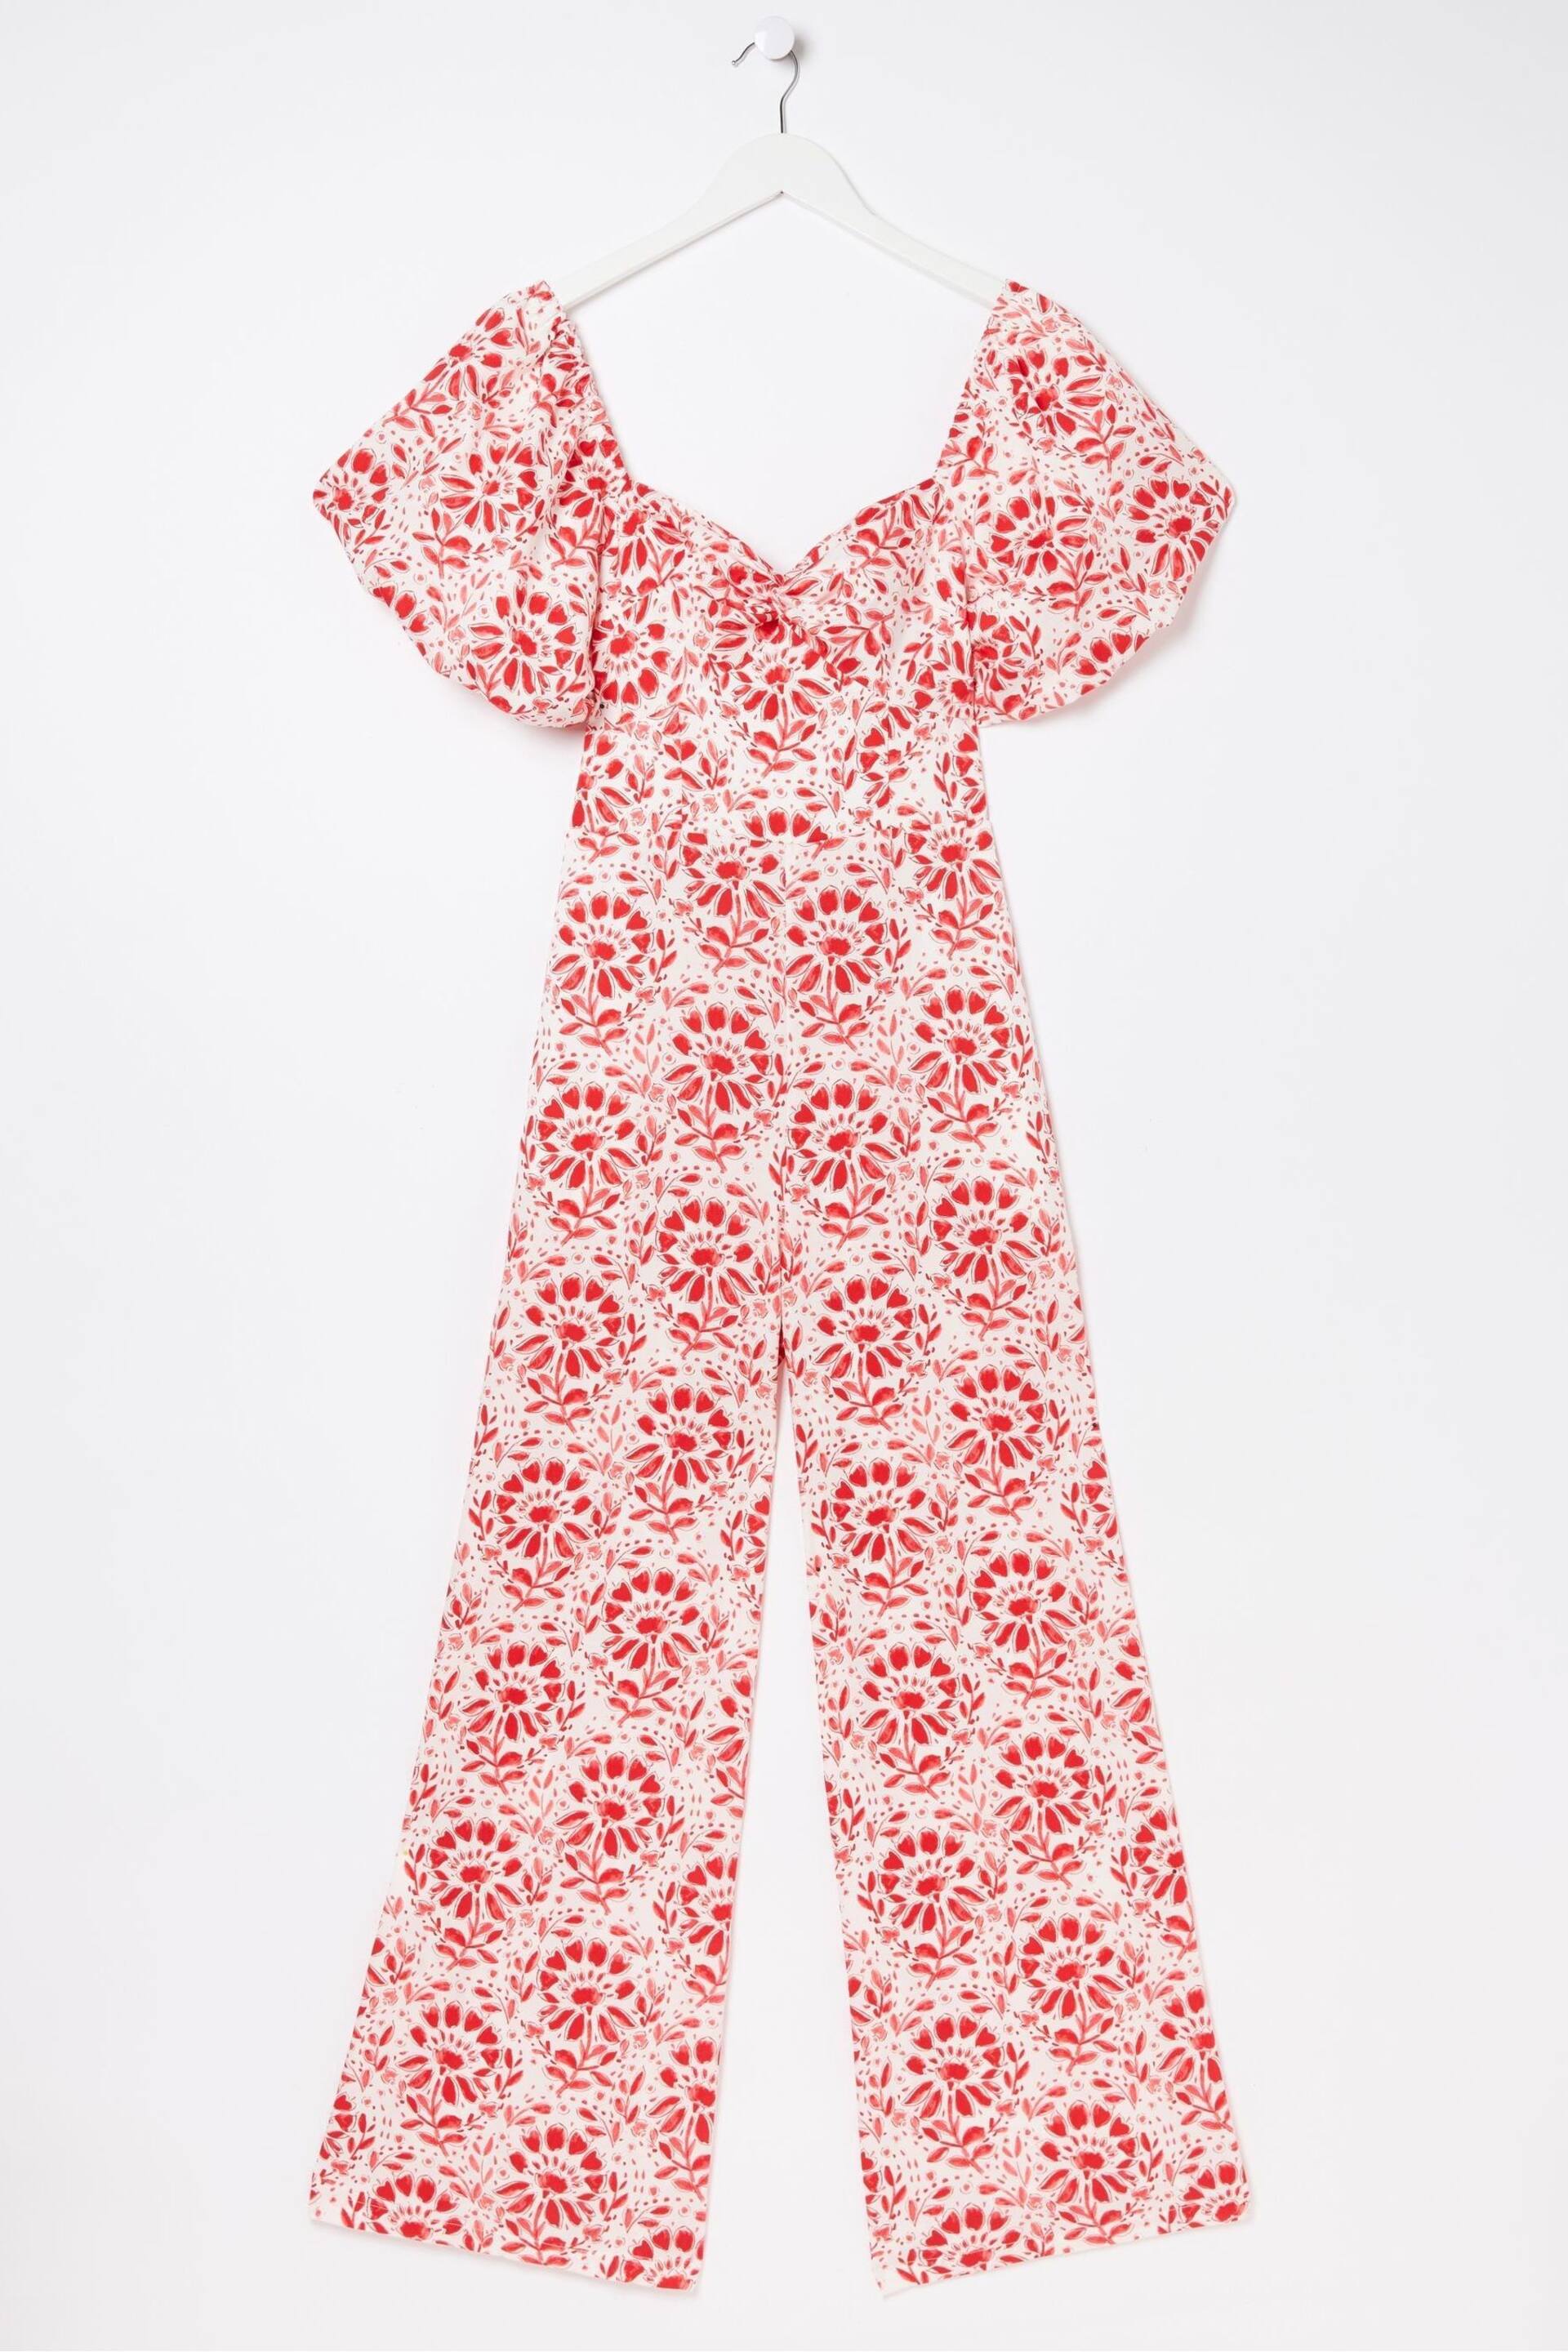 FatFace Red/White Rose Floral Tile Jumpsuit - Image 8 of 8